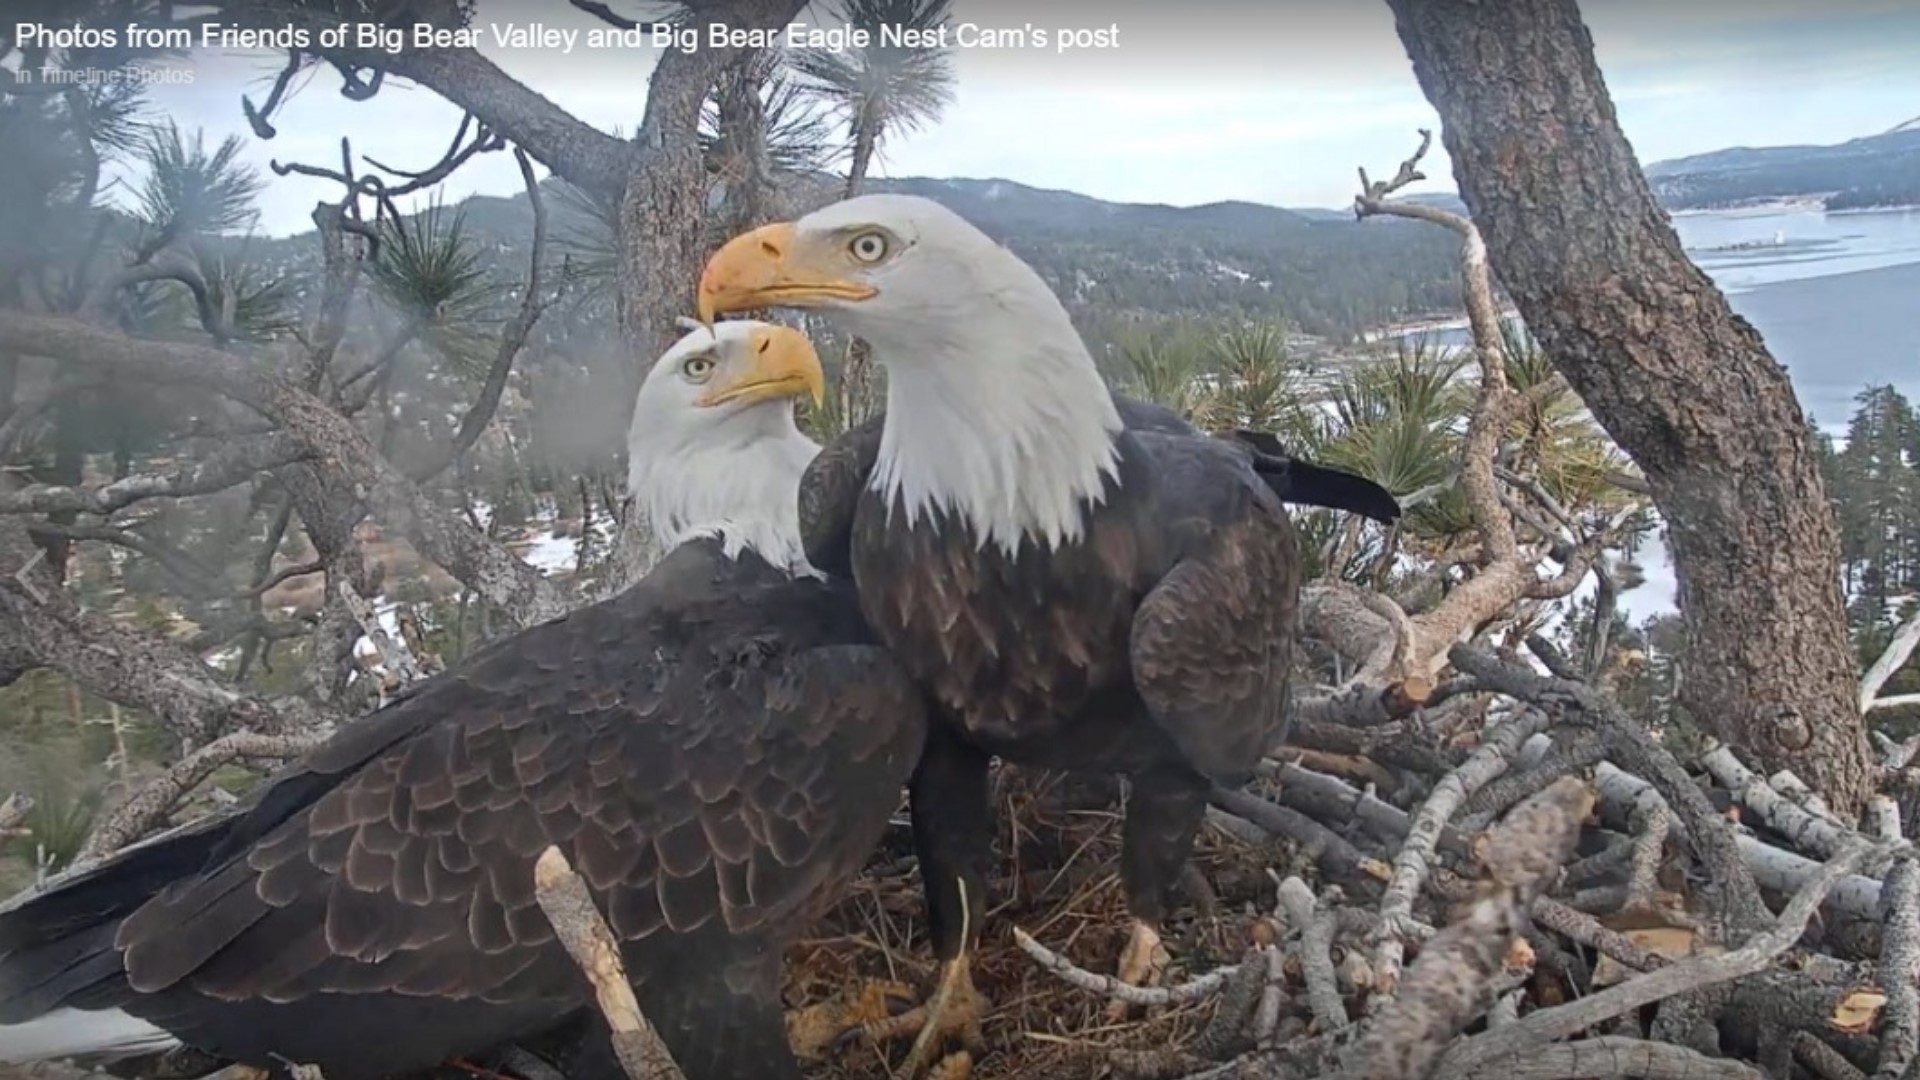 Big Bear bald eagle nest cam catches first egg of 2020